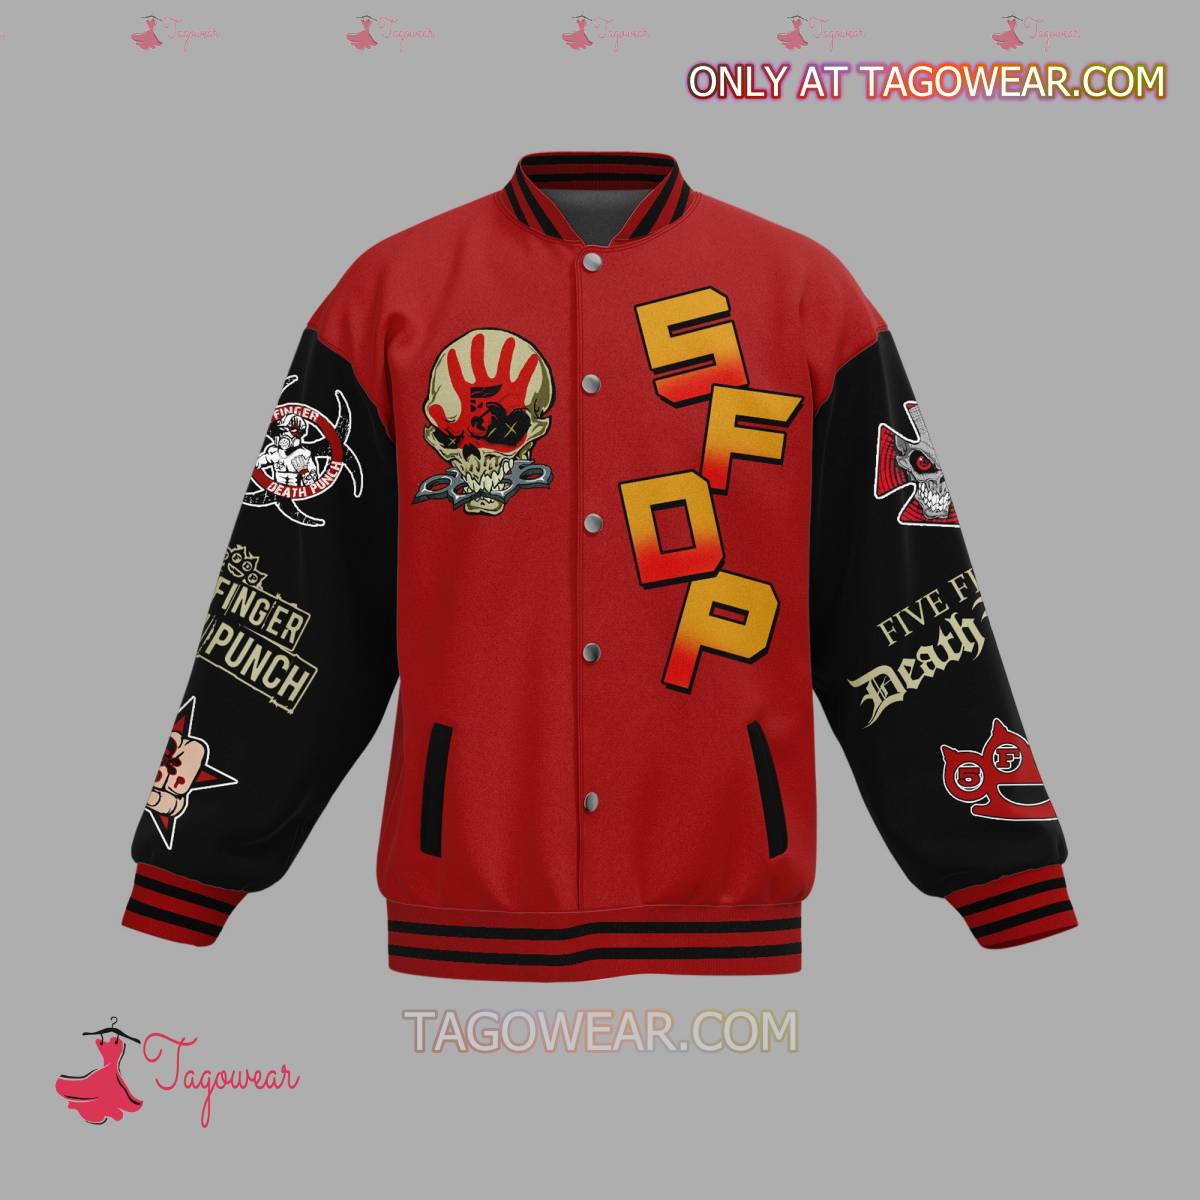 Five Finger Death Punch The Way Of The Fist Baseball Jacket a